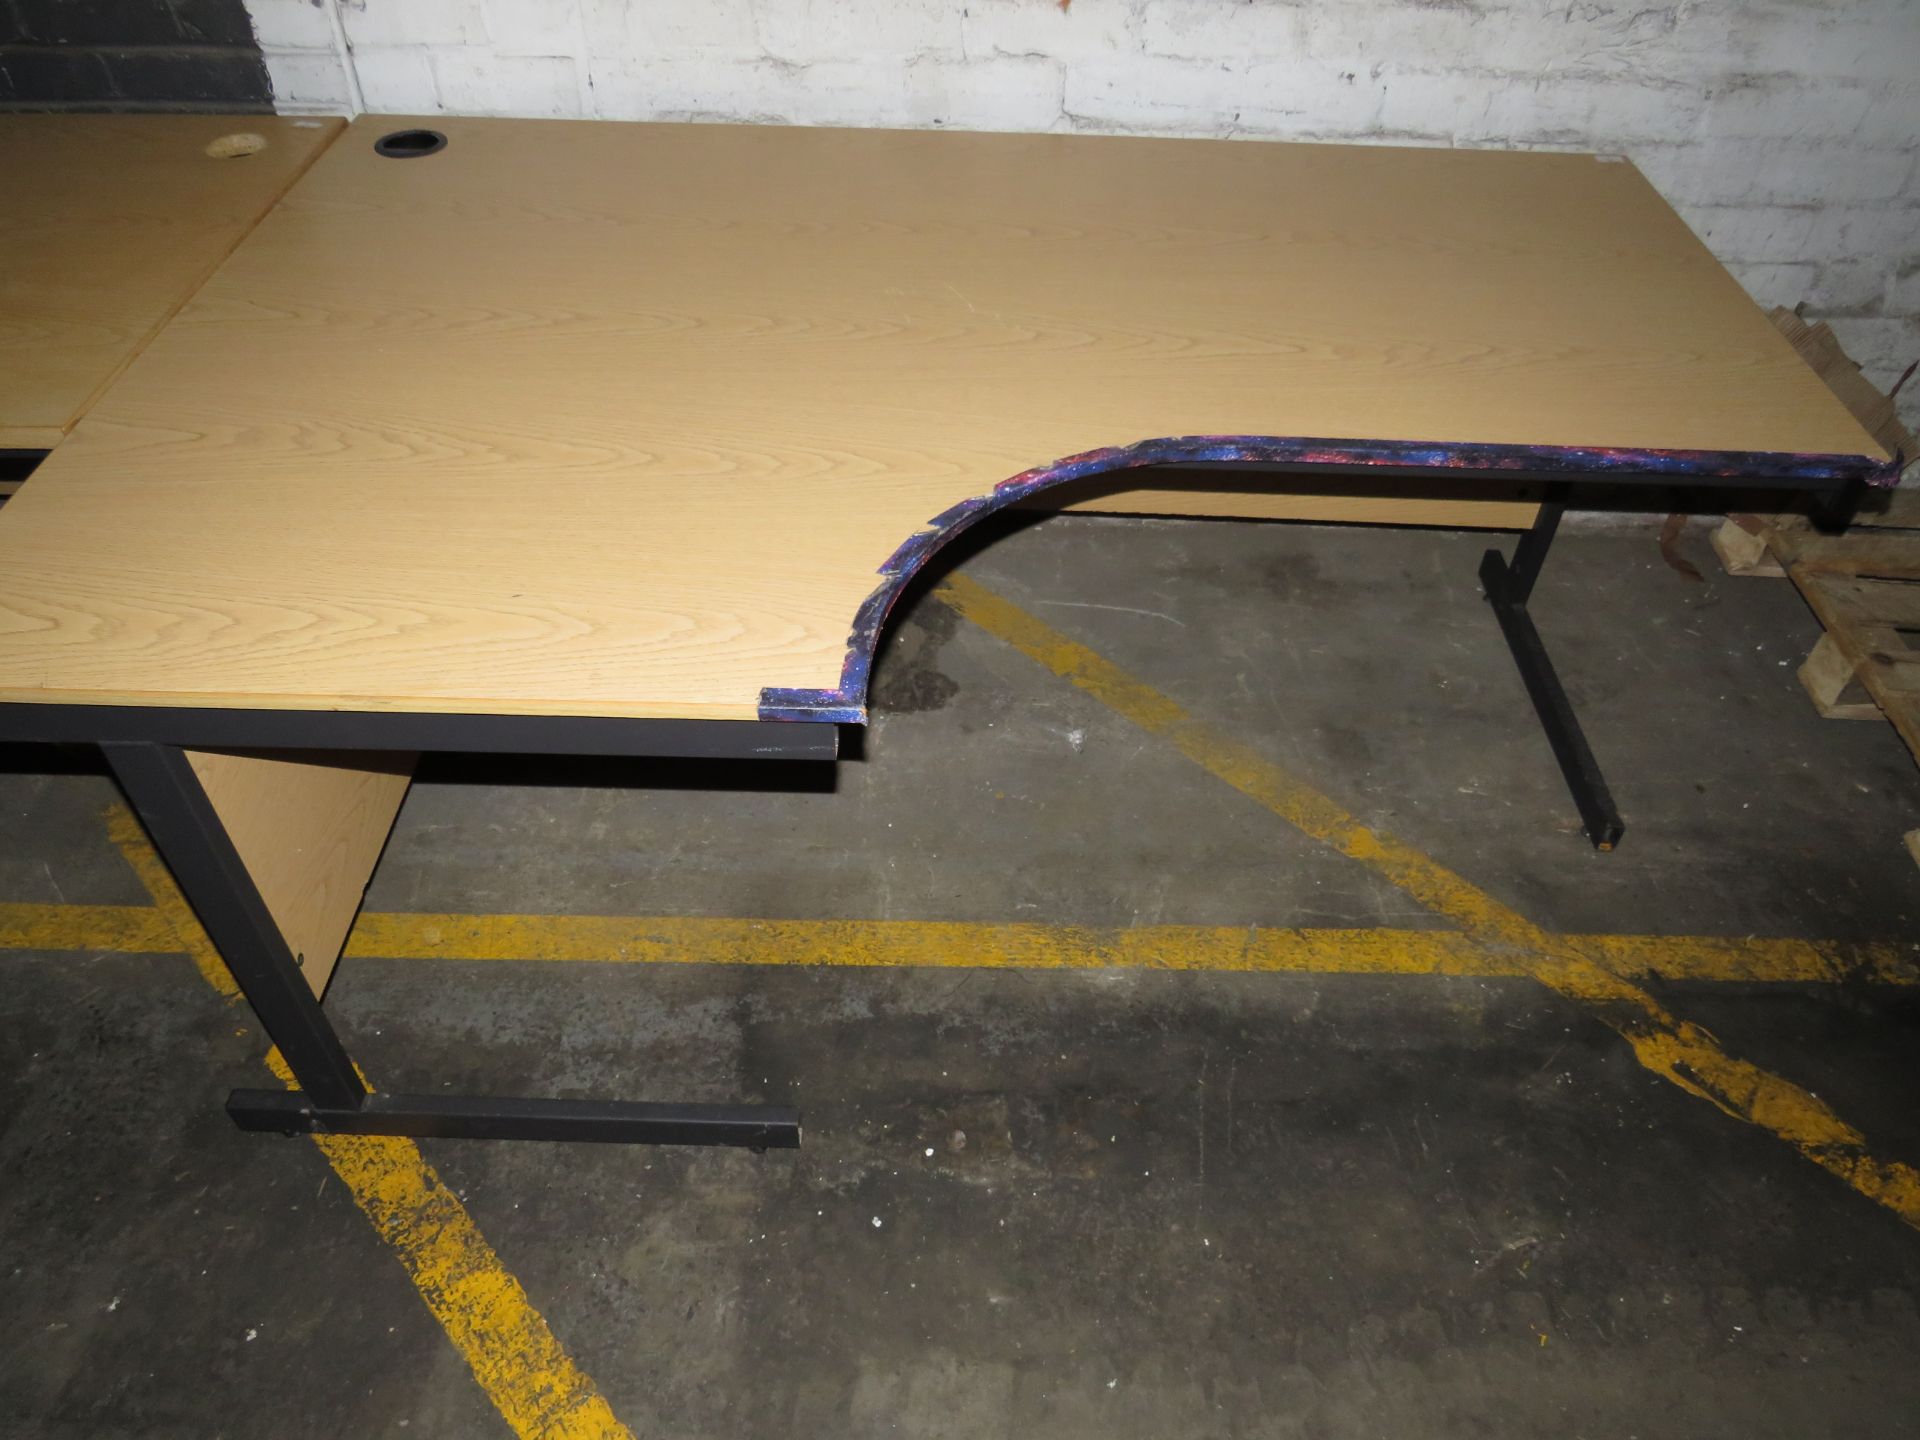 Brown L Shaped Office Desk With Wire Holes Plus Black Office Chair 115 CM X 153 CM Has Been Used - Image 2 of 3